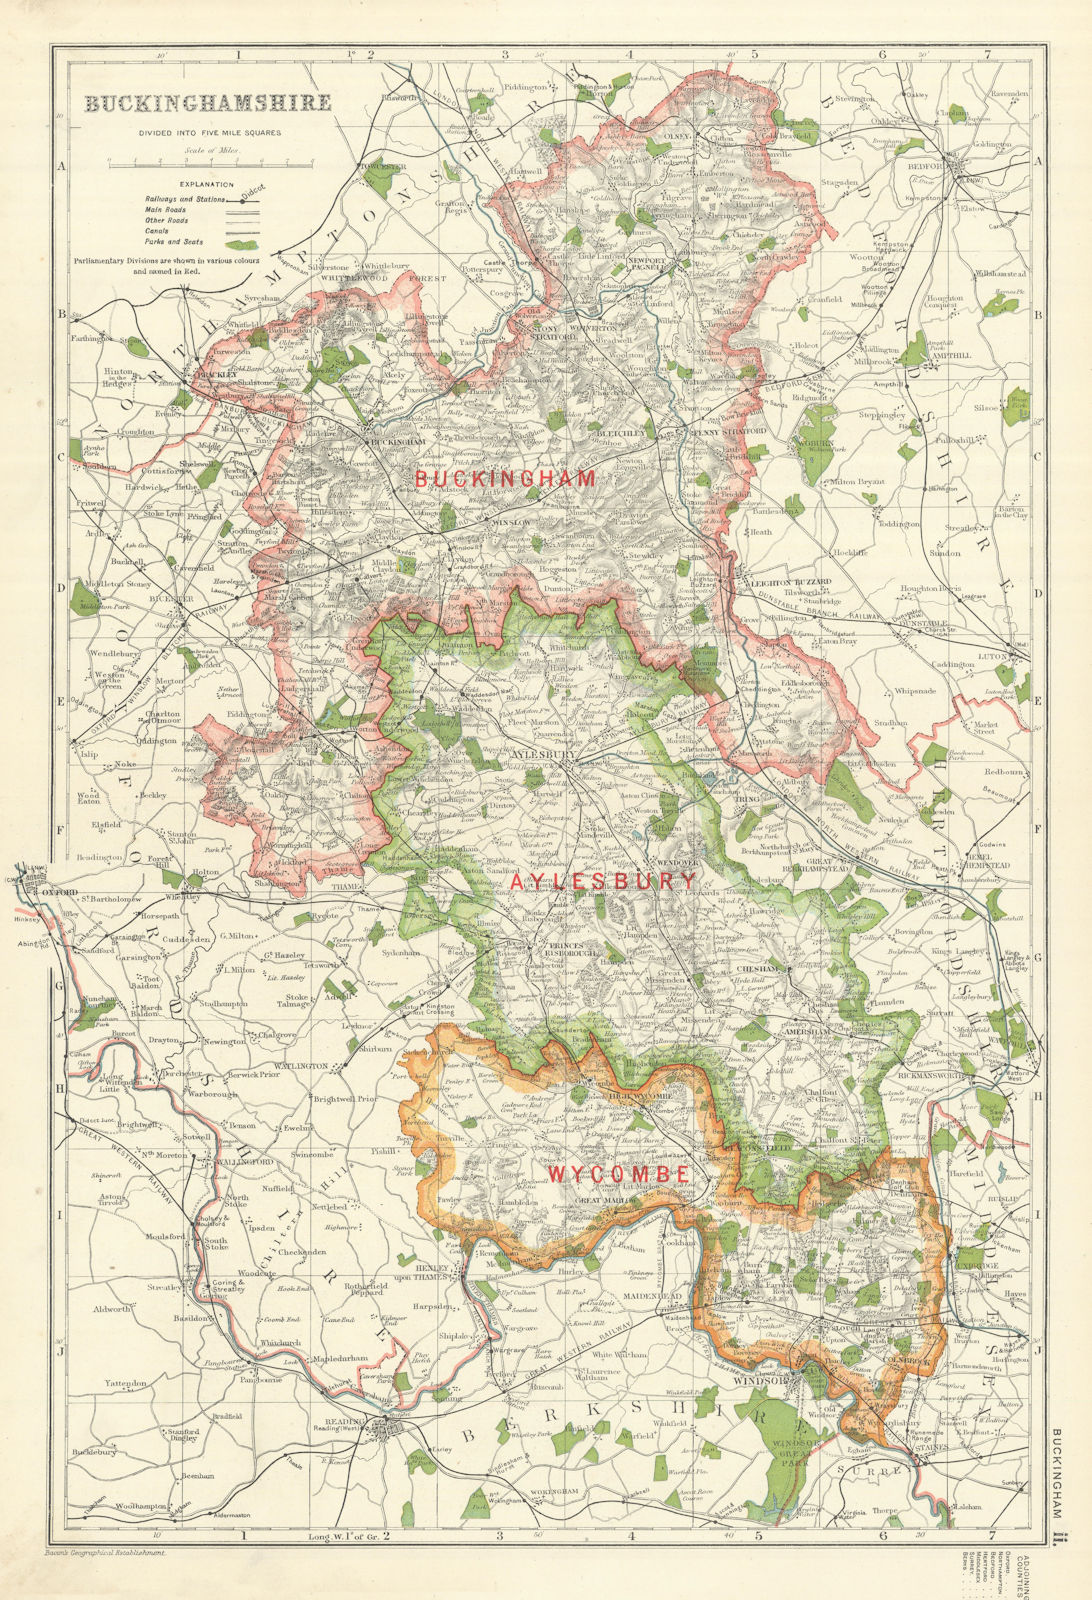 Associate Product BUCKINGHAMSHIRE. Showing Parliamentary divisions,boroughs & parks.BACON 1919 map